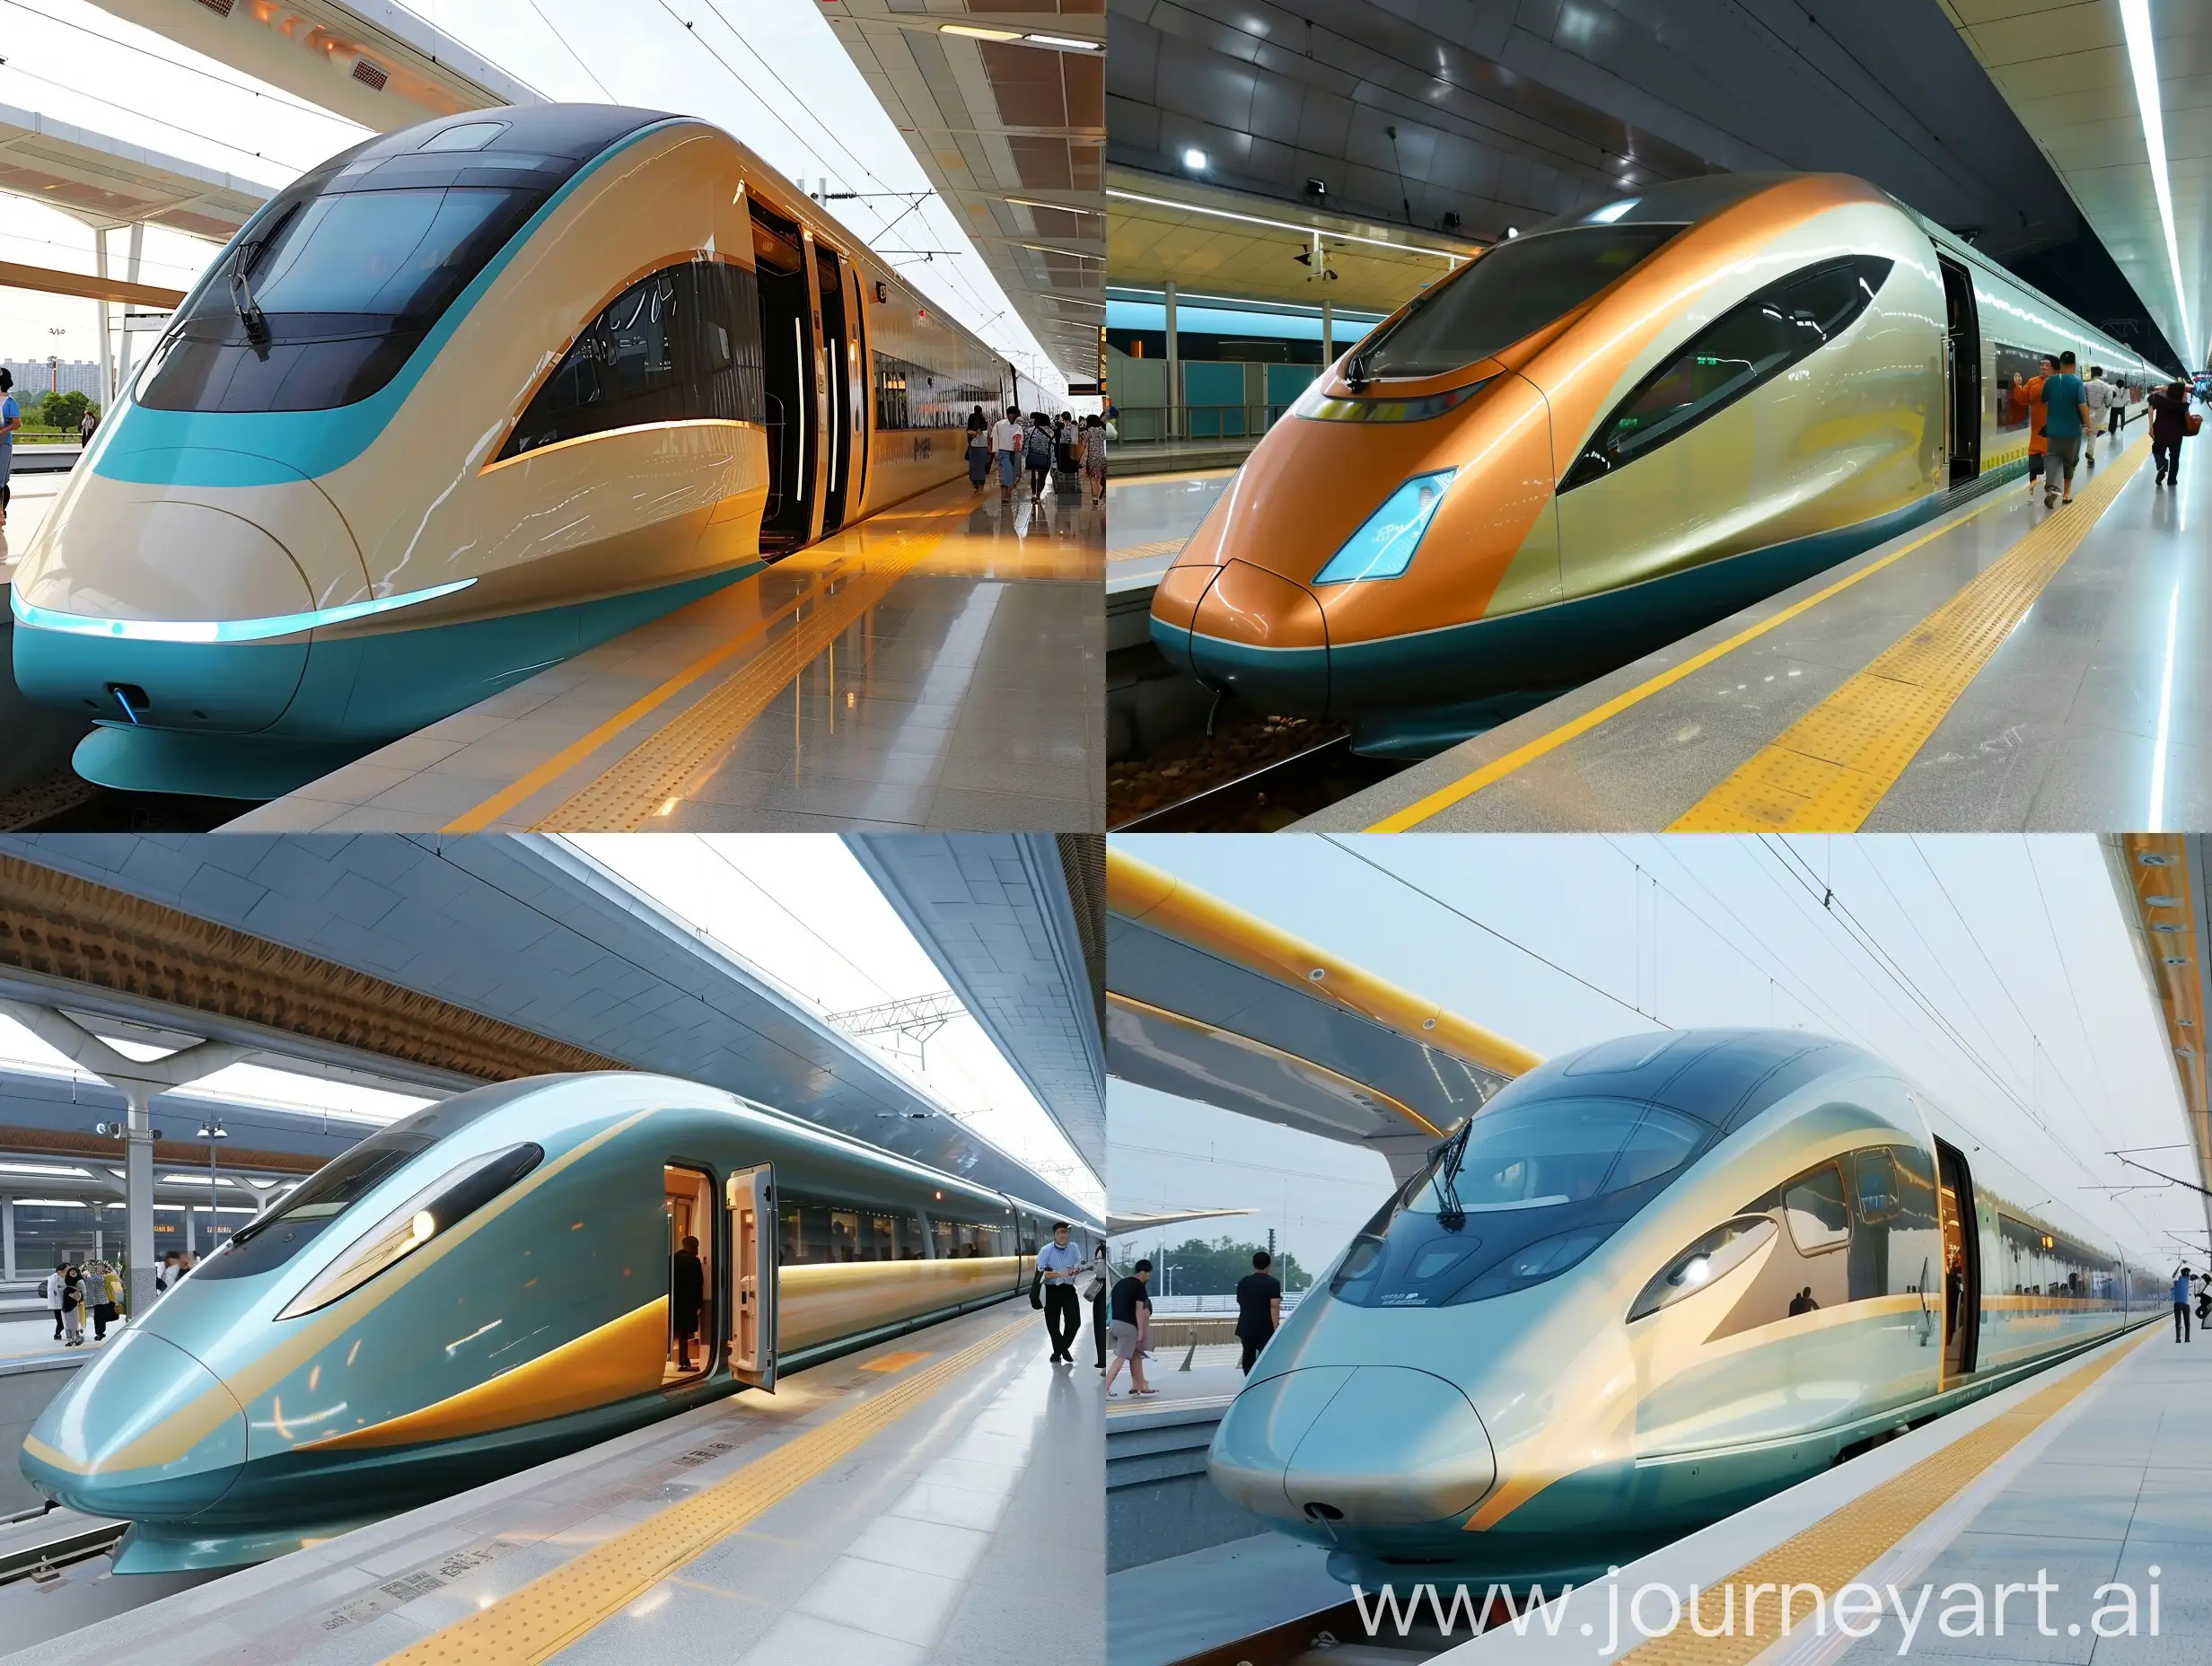 Exterior view of a high-speed train, the train is standing still, the doors are open, people get on or off the train. bright, light color, two clear lines at the bottom of the side: a combination of blue and yellow colors, The side windows are large, The front end has a futuristic design suitable for high speed, The headlights are exquisitely made, people walk along the platform, smiles on people's faces.